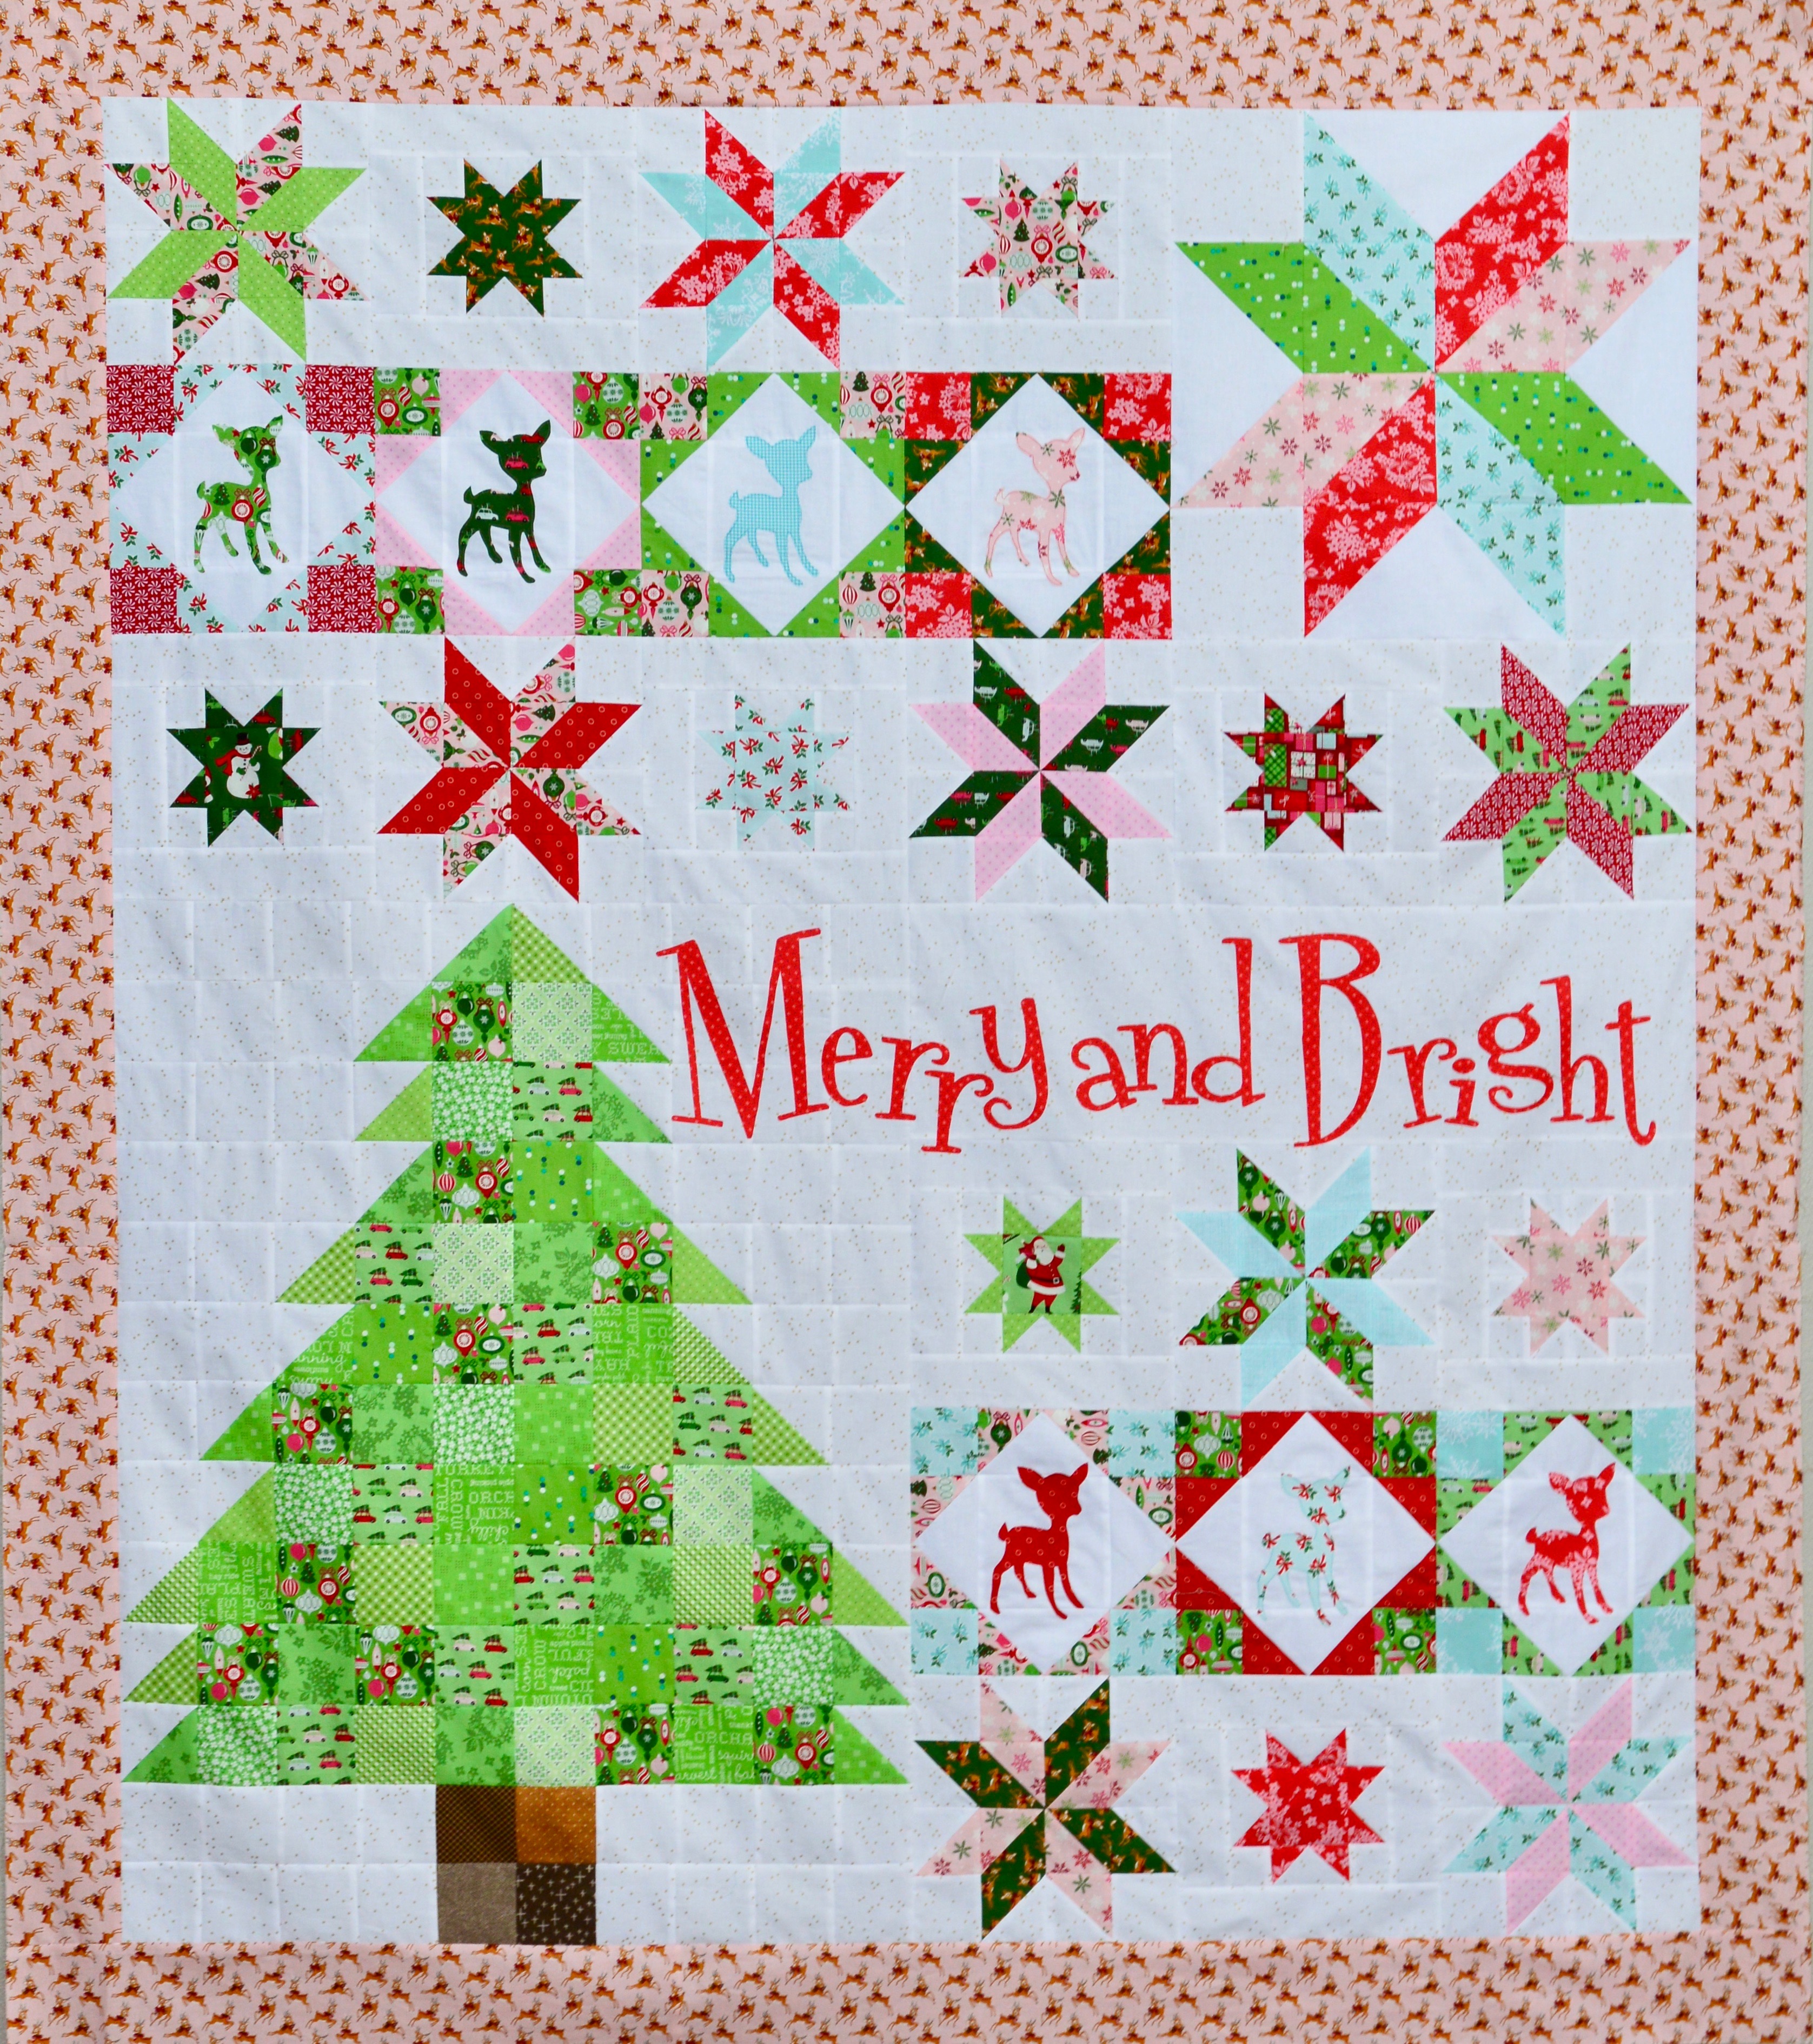 Merry and bright quilt pattern